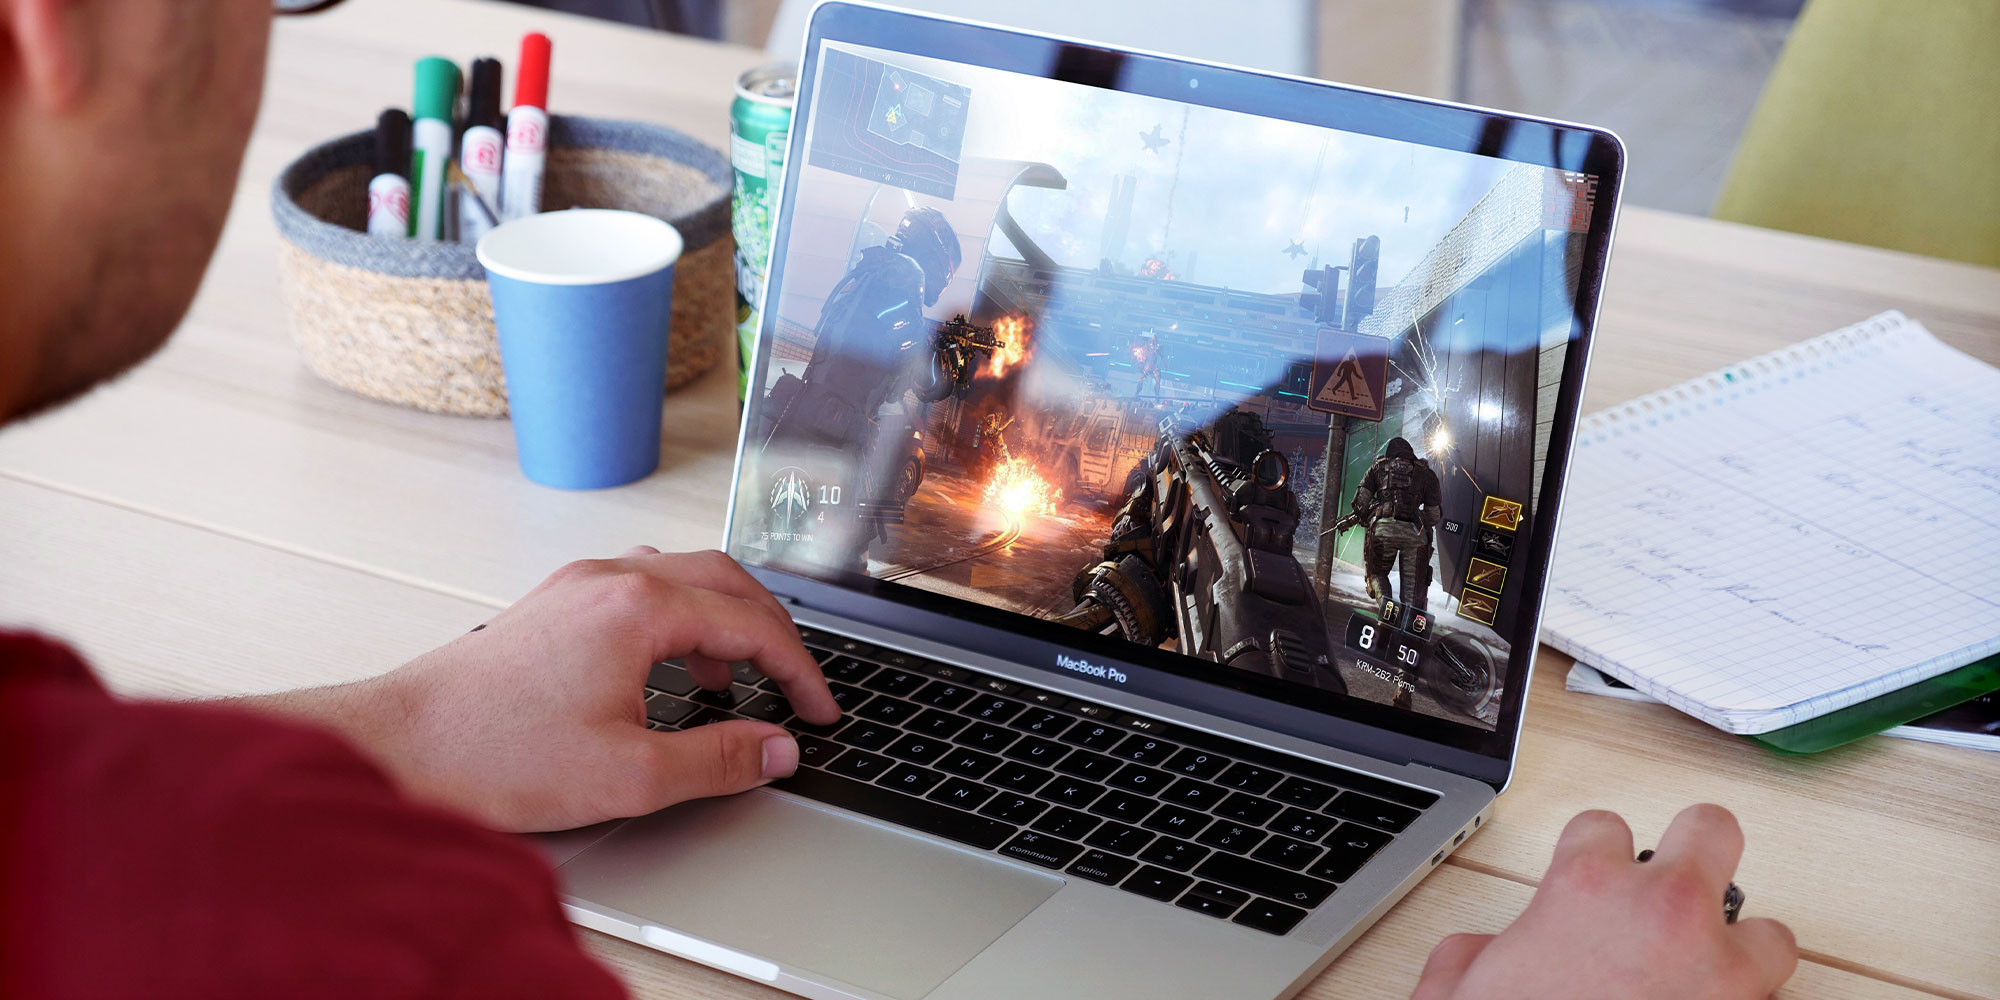 How to Play PC Games on a Mac: GeForce Now, Stadia, Shadow and More